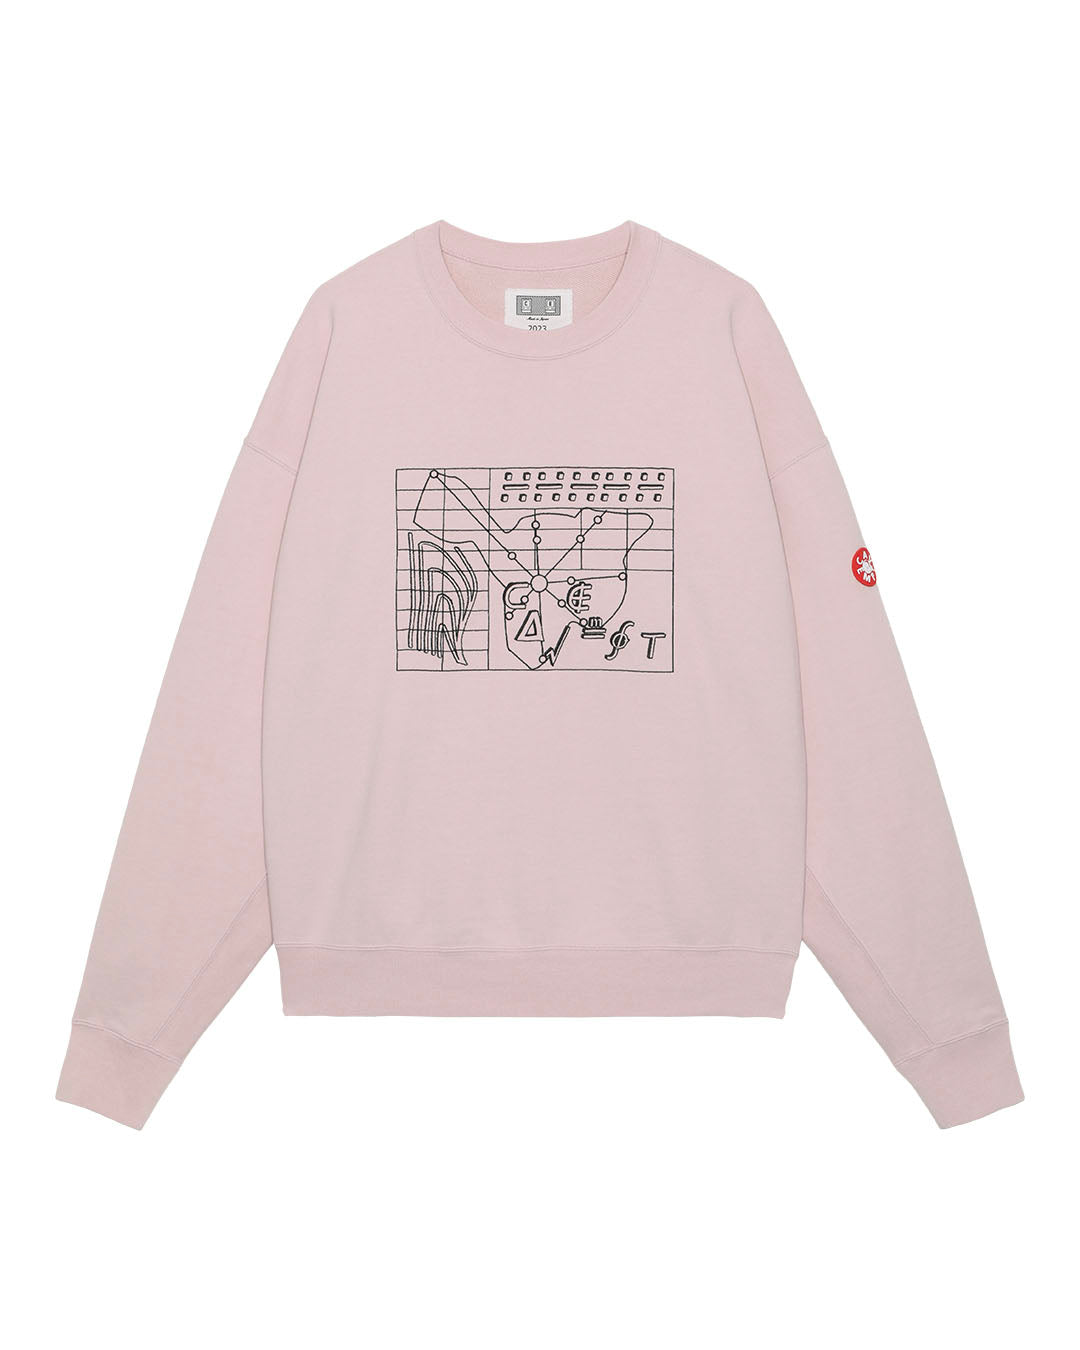 【C.E】NOT ELEMENT OF CREW NECK - PINK